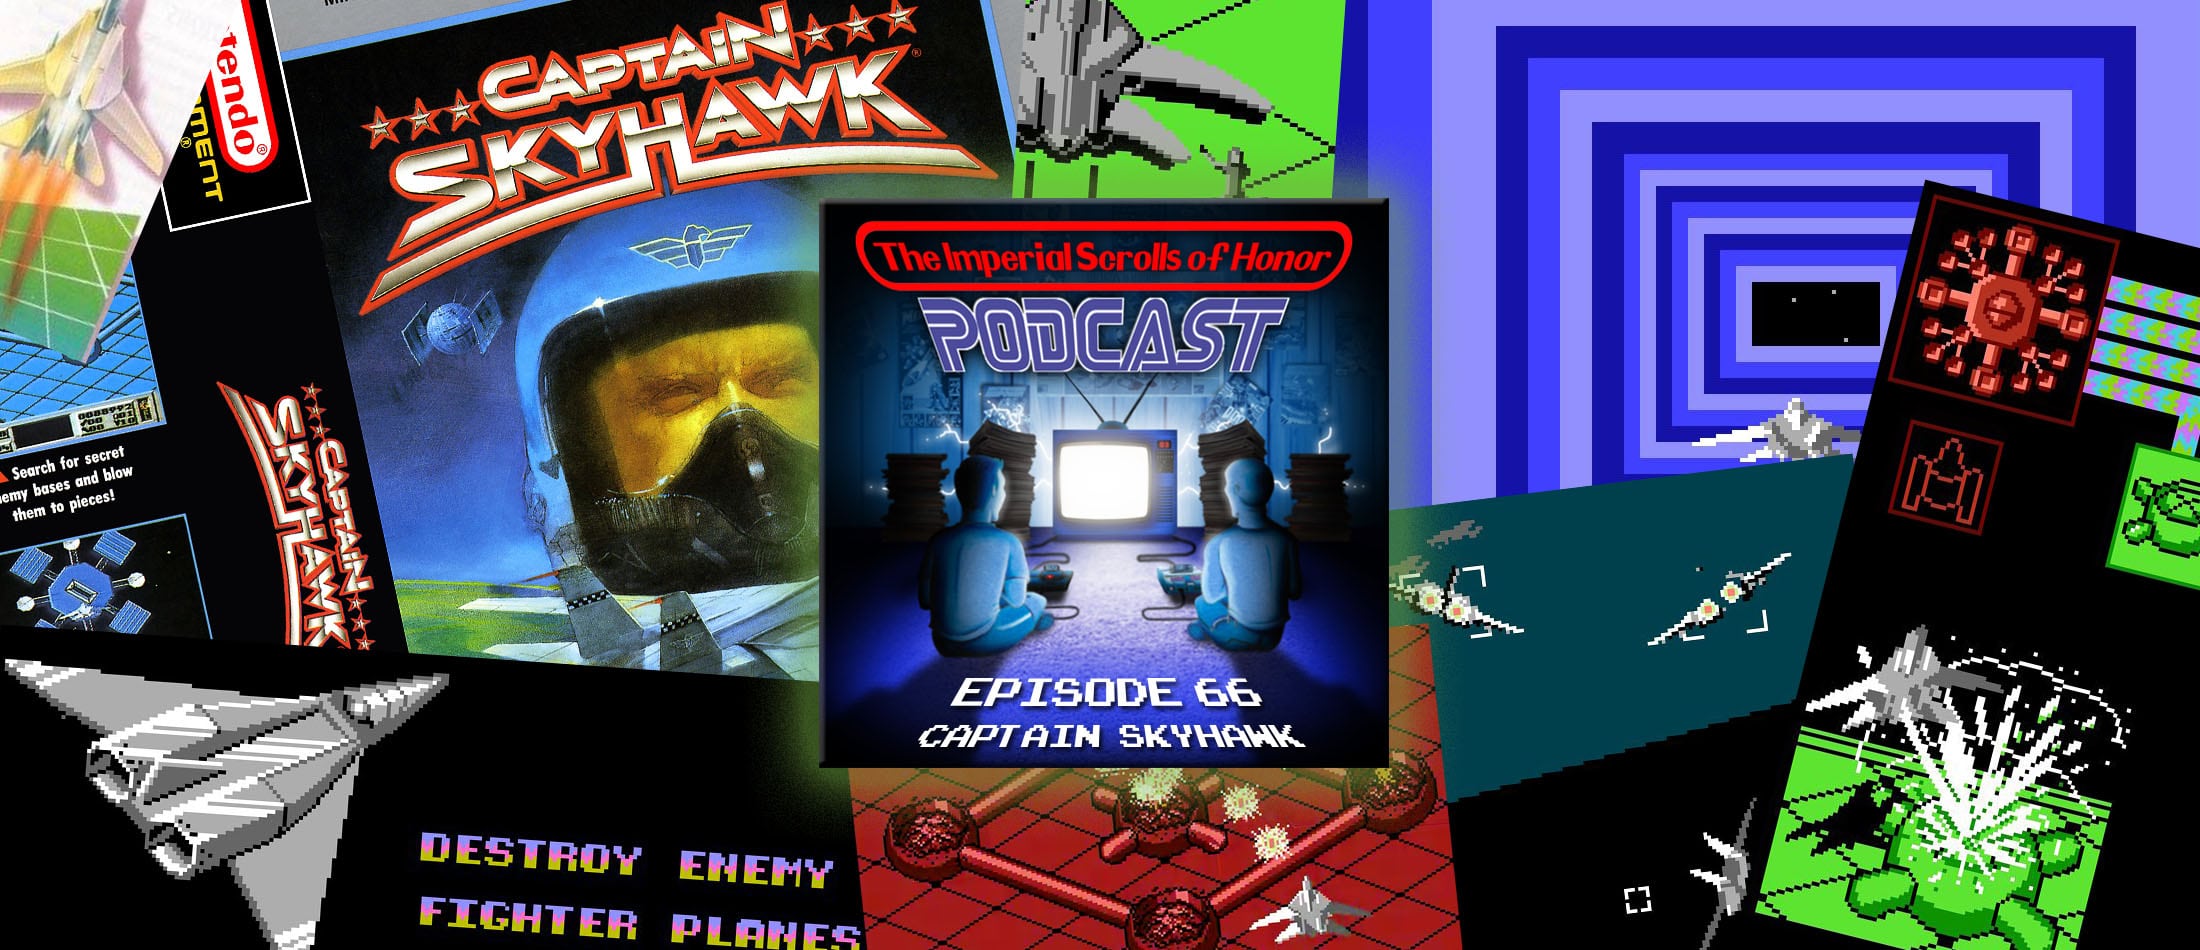 The Imperial Scrolls of Honor Podcast - Ep 66 - Captain Skyhawk (NES)